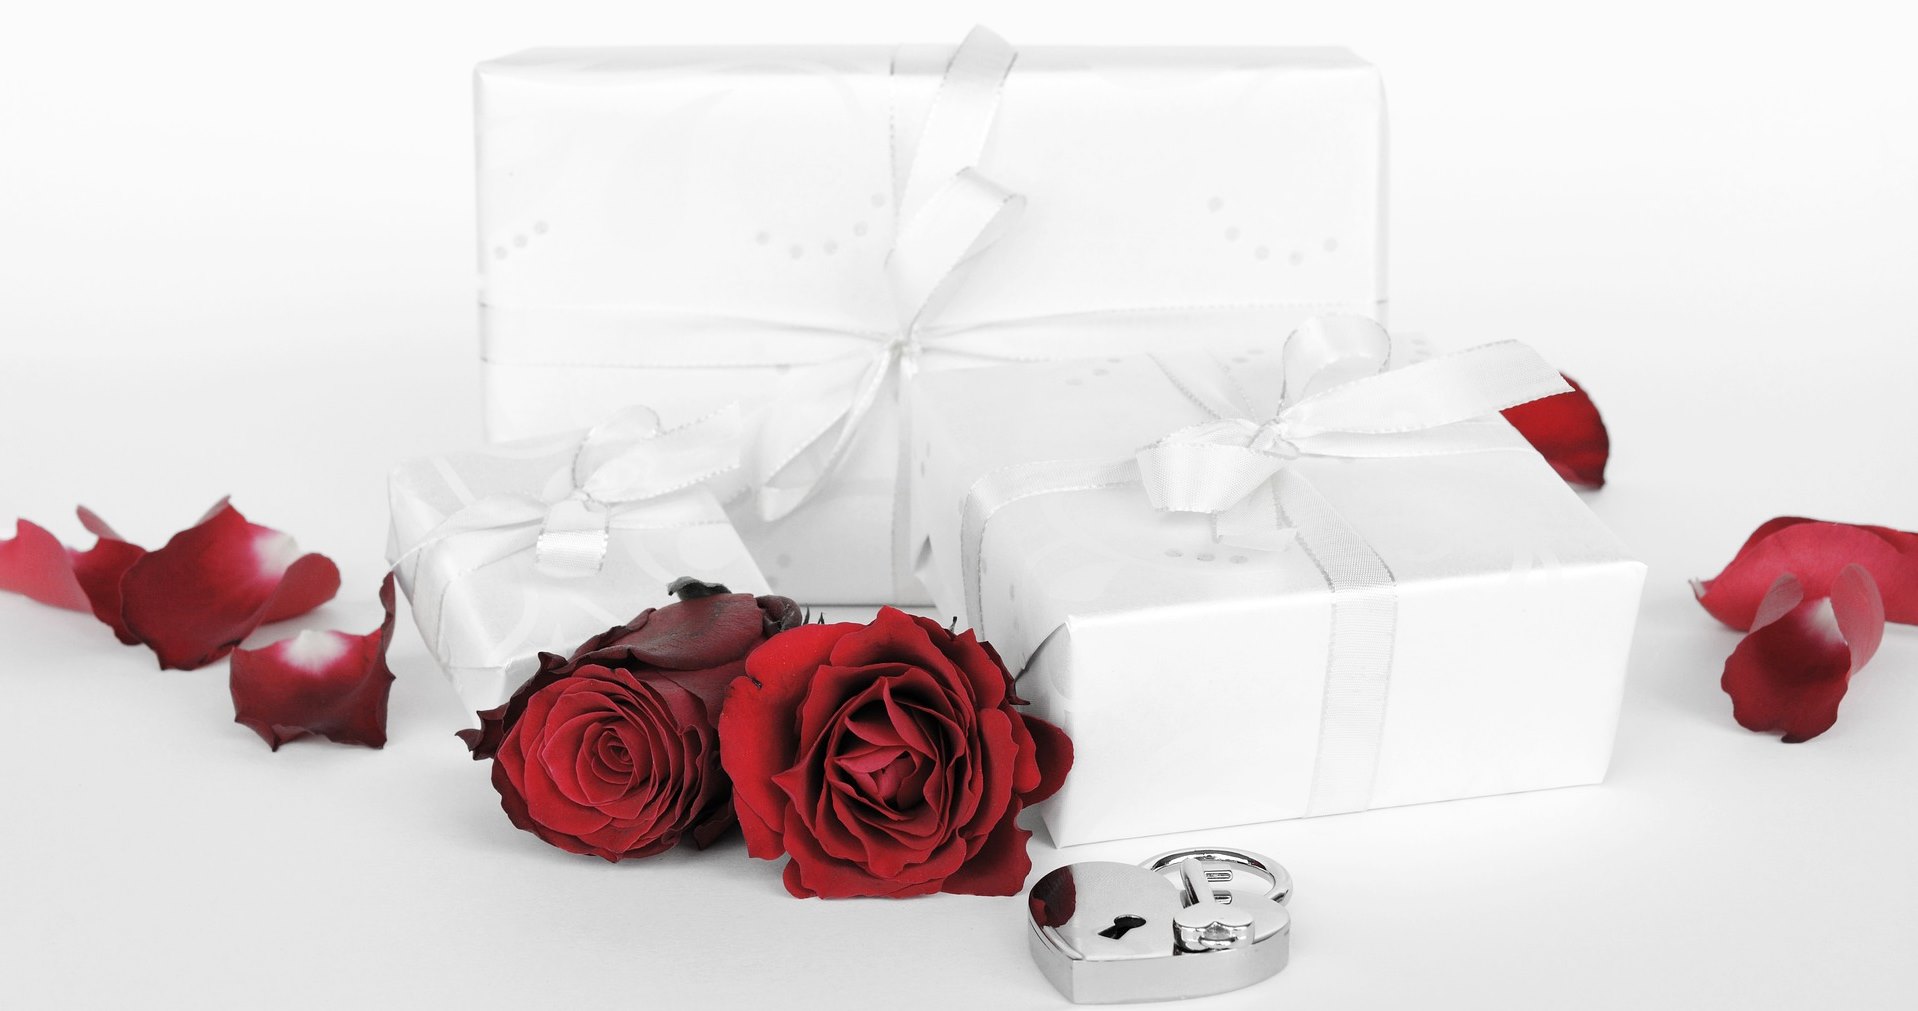 Simple Valentines giftS need no words to say how much your loved one matters.